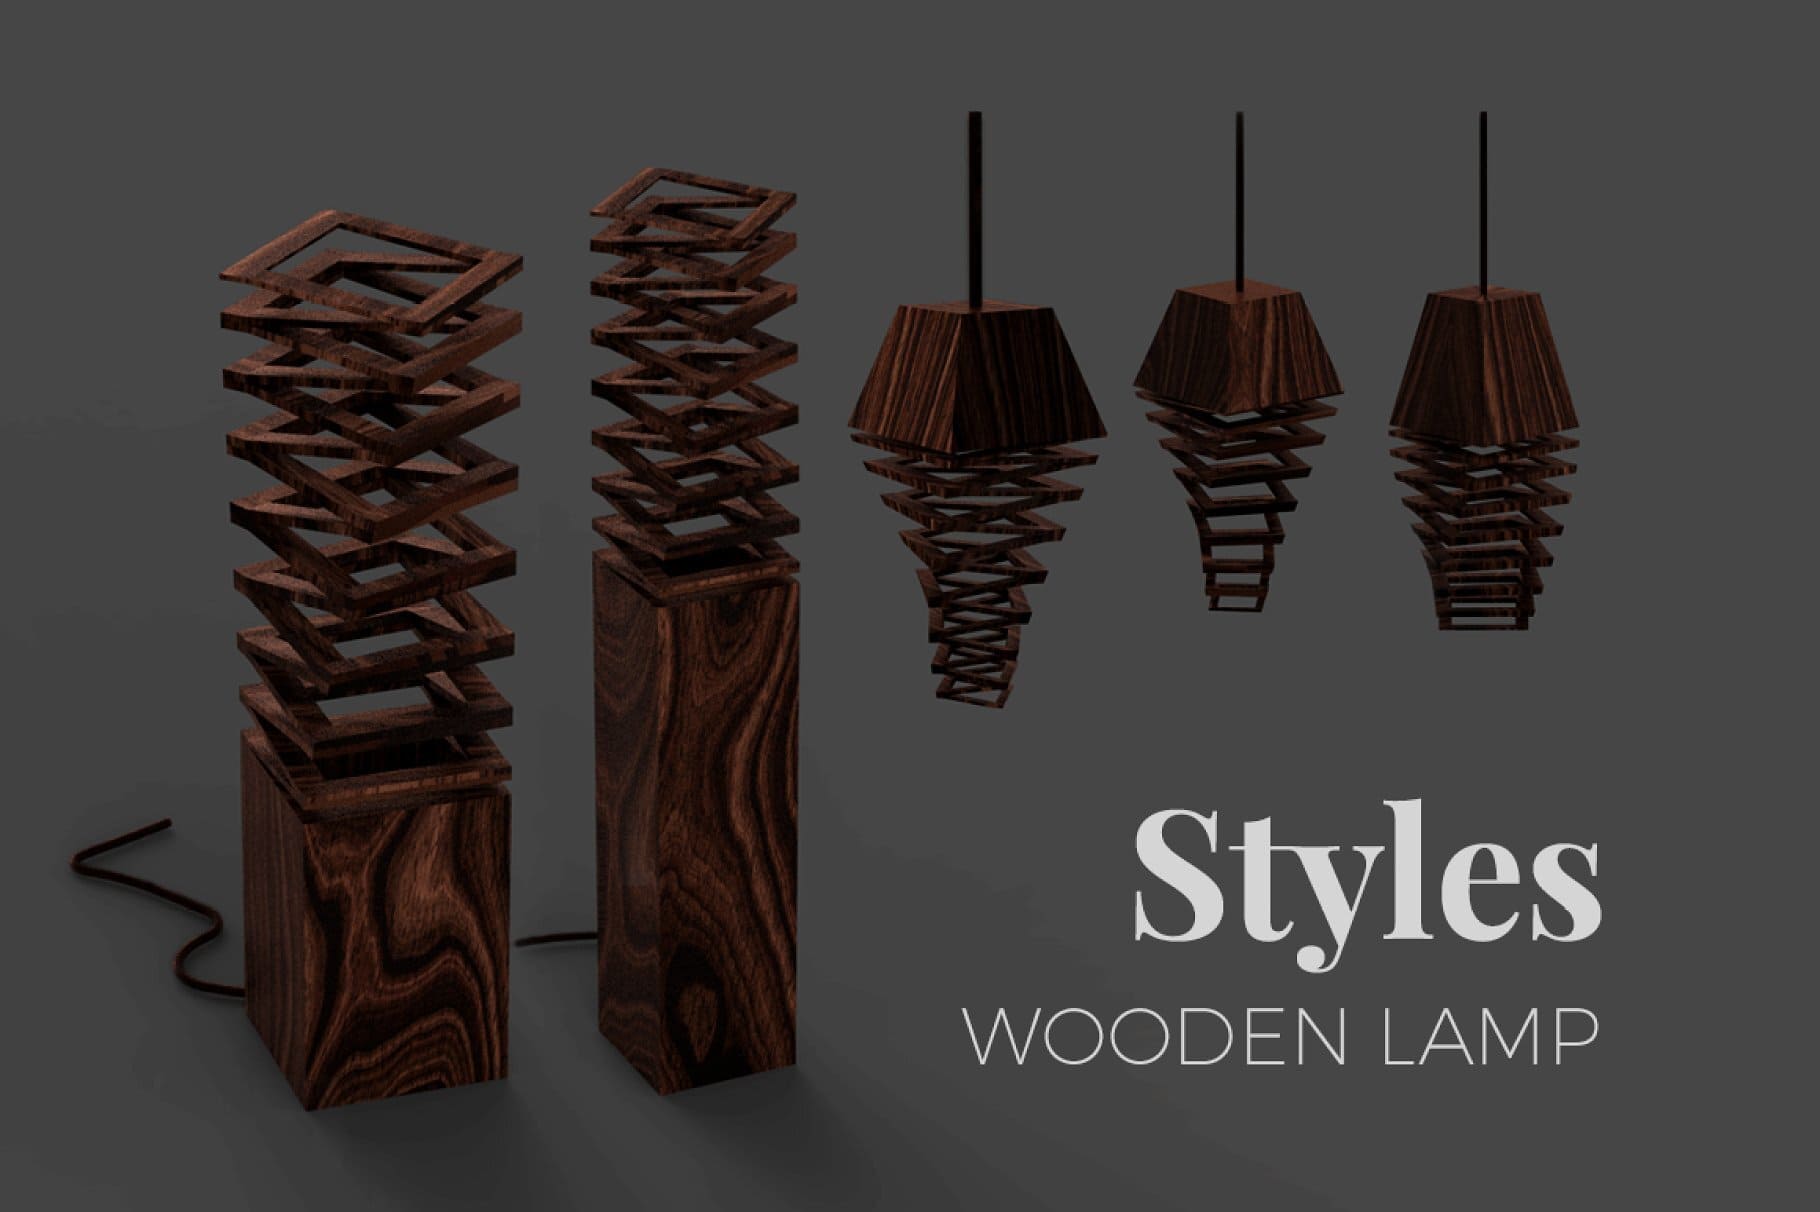 Stylish spiral-shaped wooden lamps.